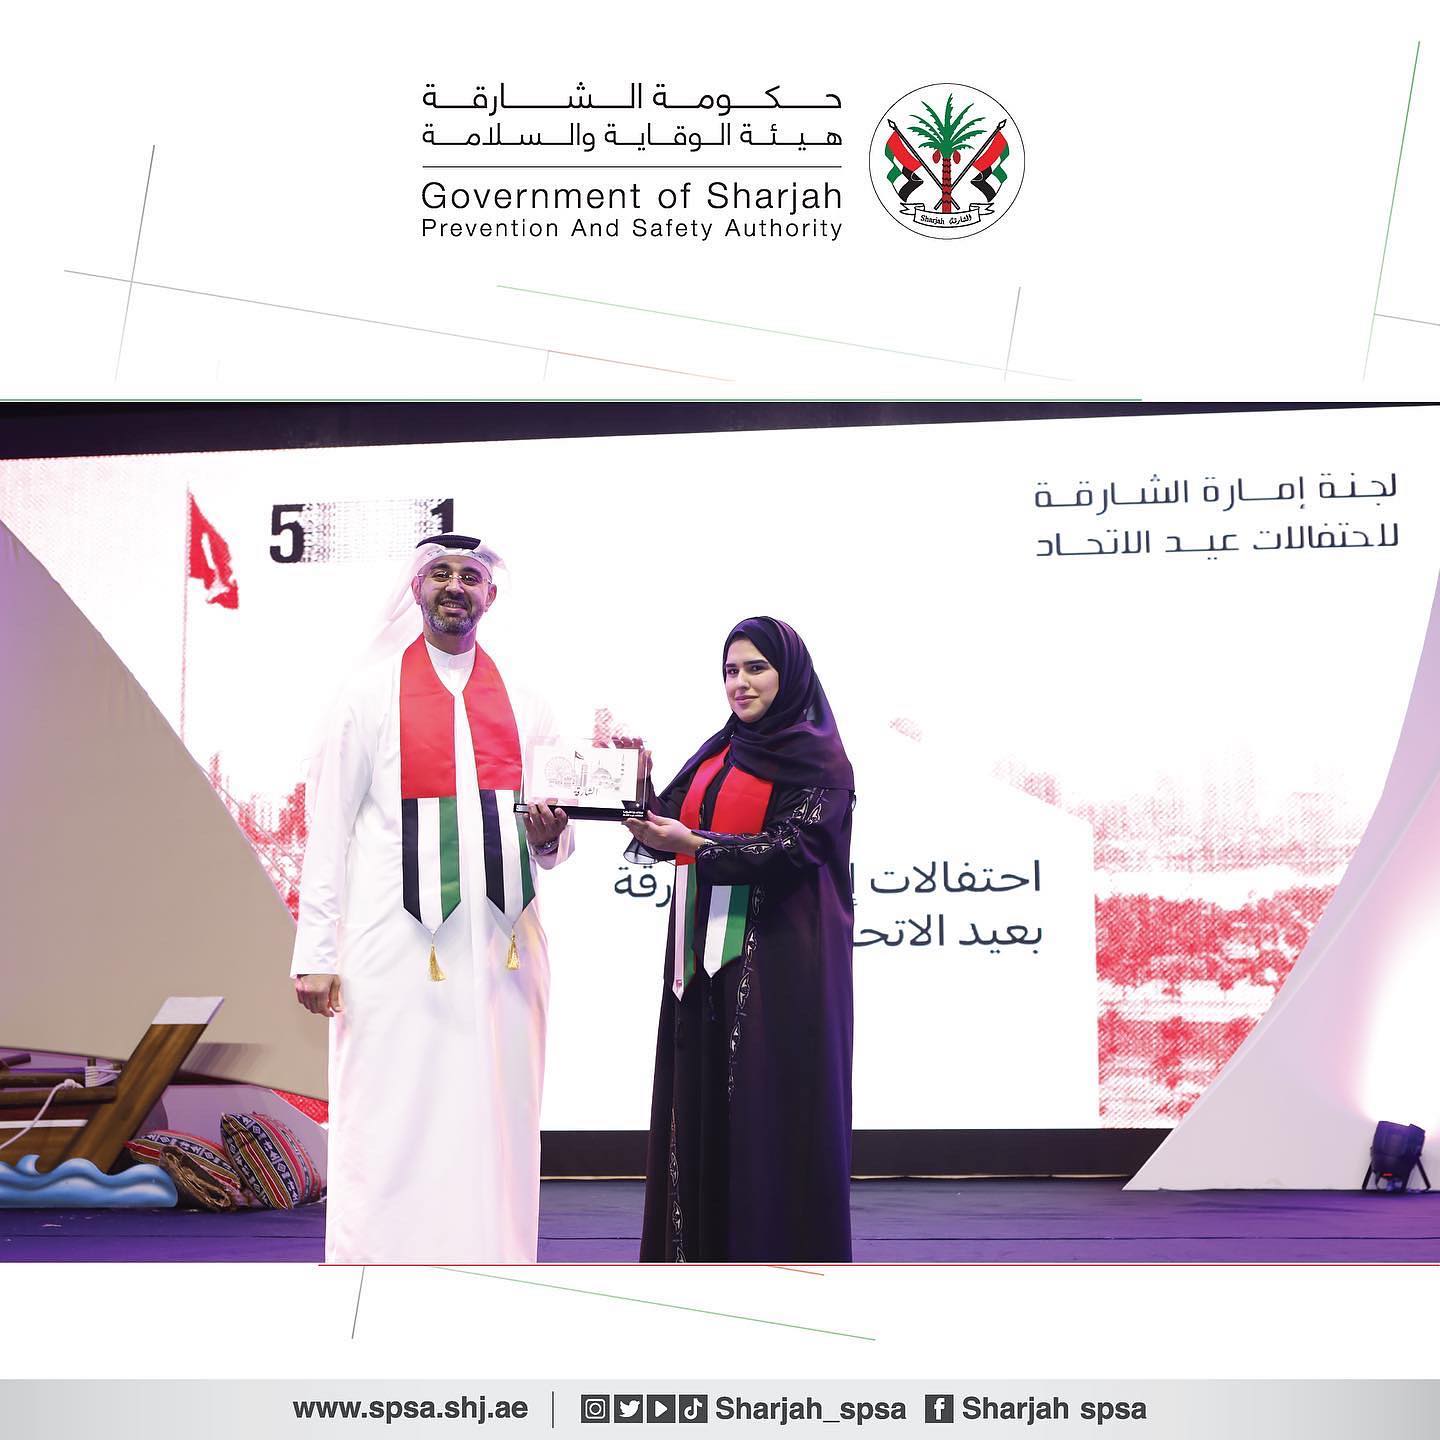 The Emirate of Sharjah Committee for the 51st National Day activities honors the Prevention and Safety Authority